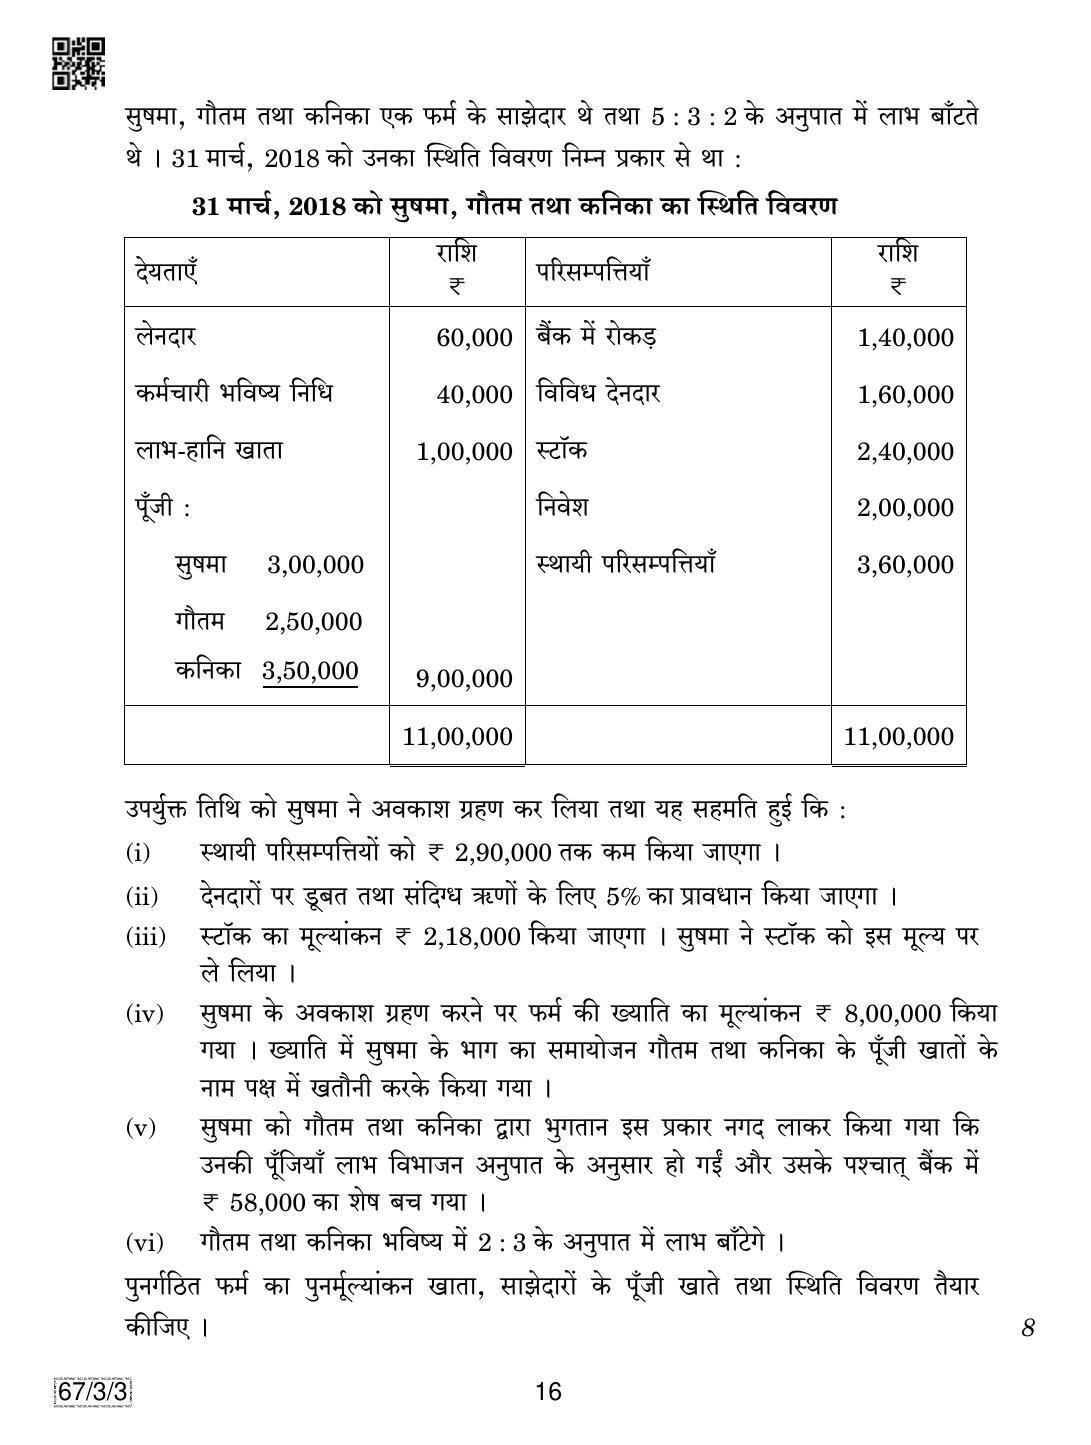 CBSE Class 12 67-3-3 Accountancy 2019 Question Paper - Page 16